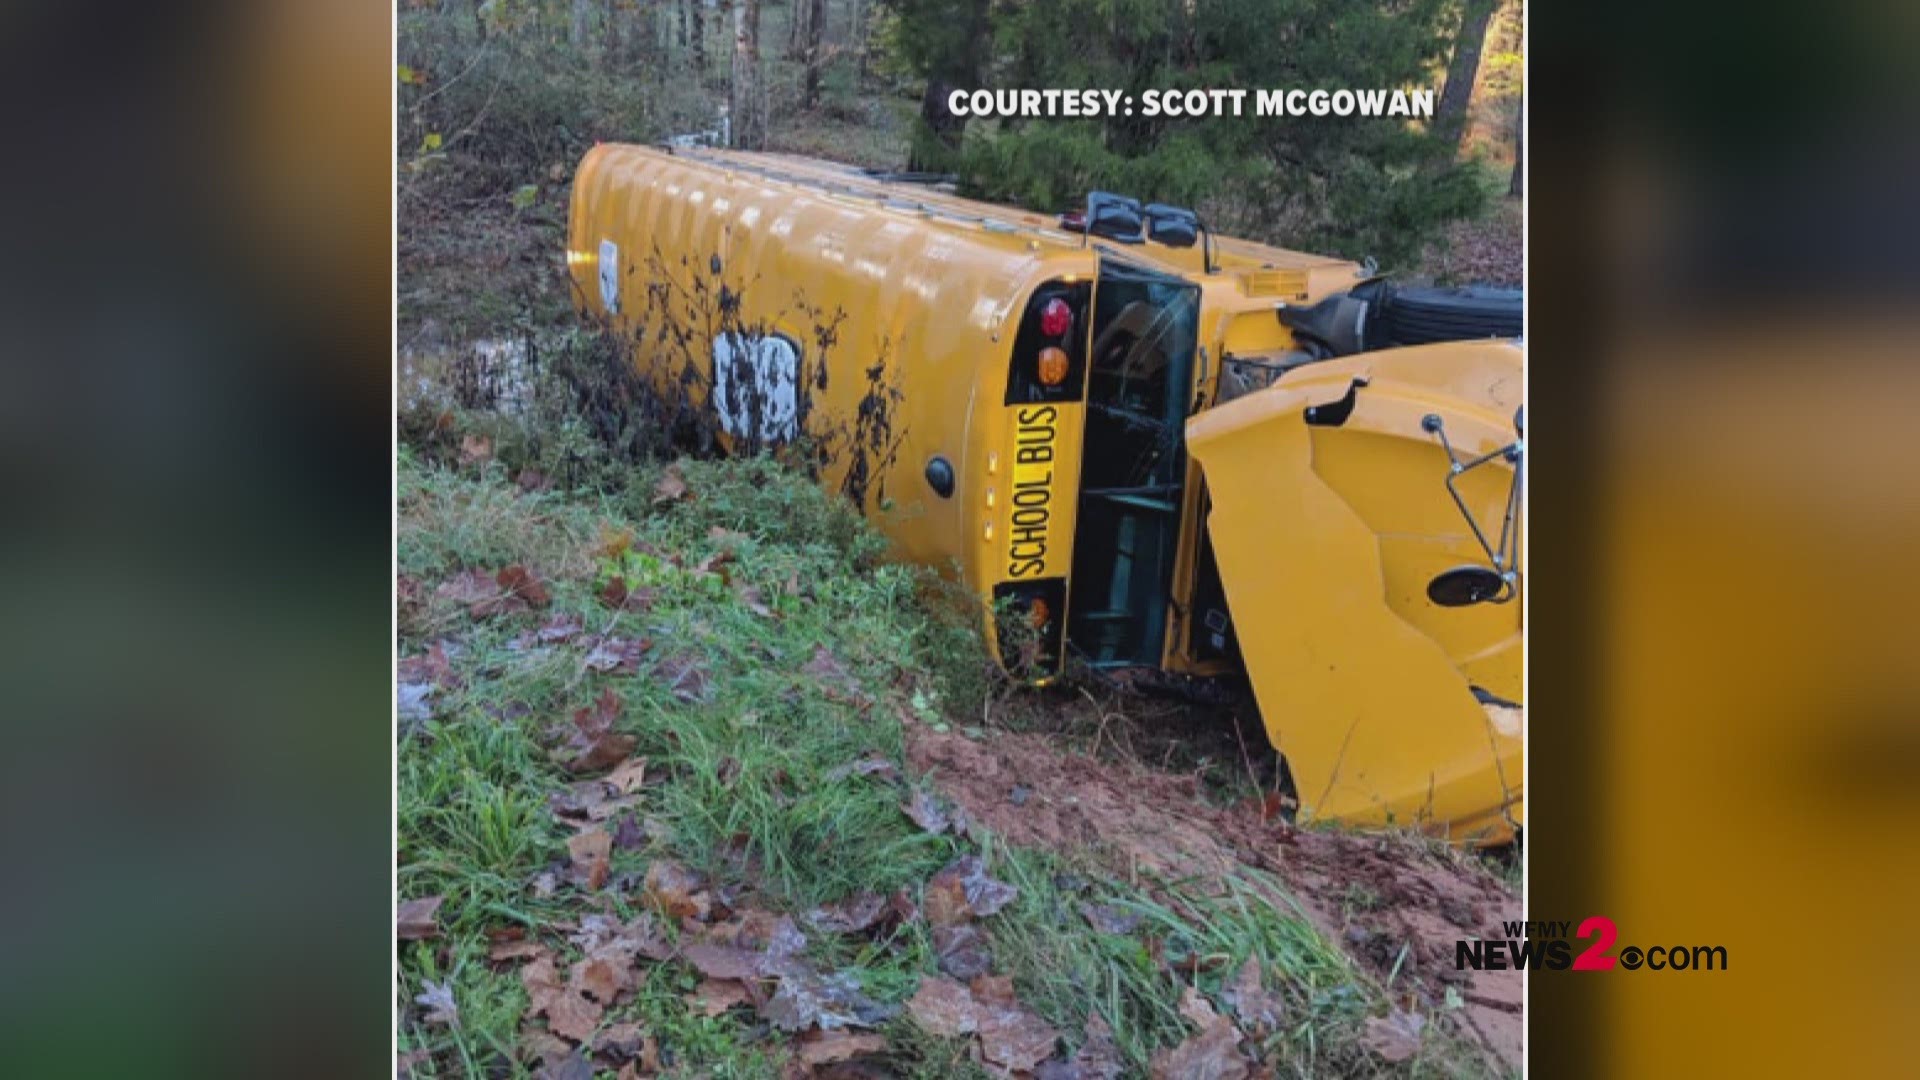 12 students were on board the bus and heading to Southern Alamance High School, when the bus's wheel dropped off of the shoulder. The driver over-corrected, and the bus rolled over into an embankment.